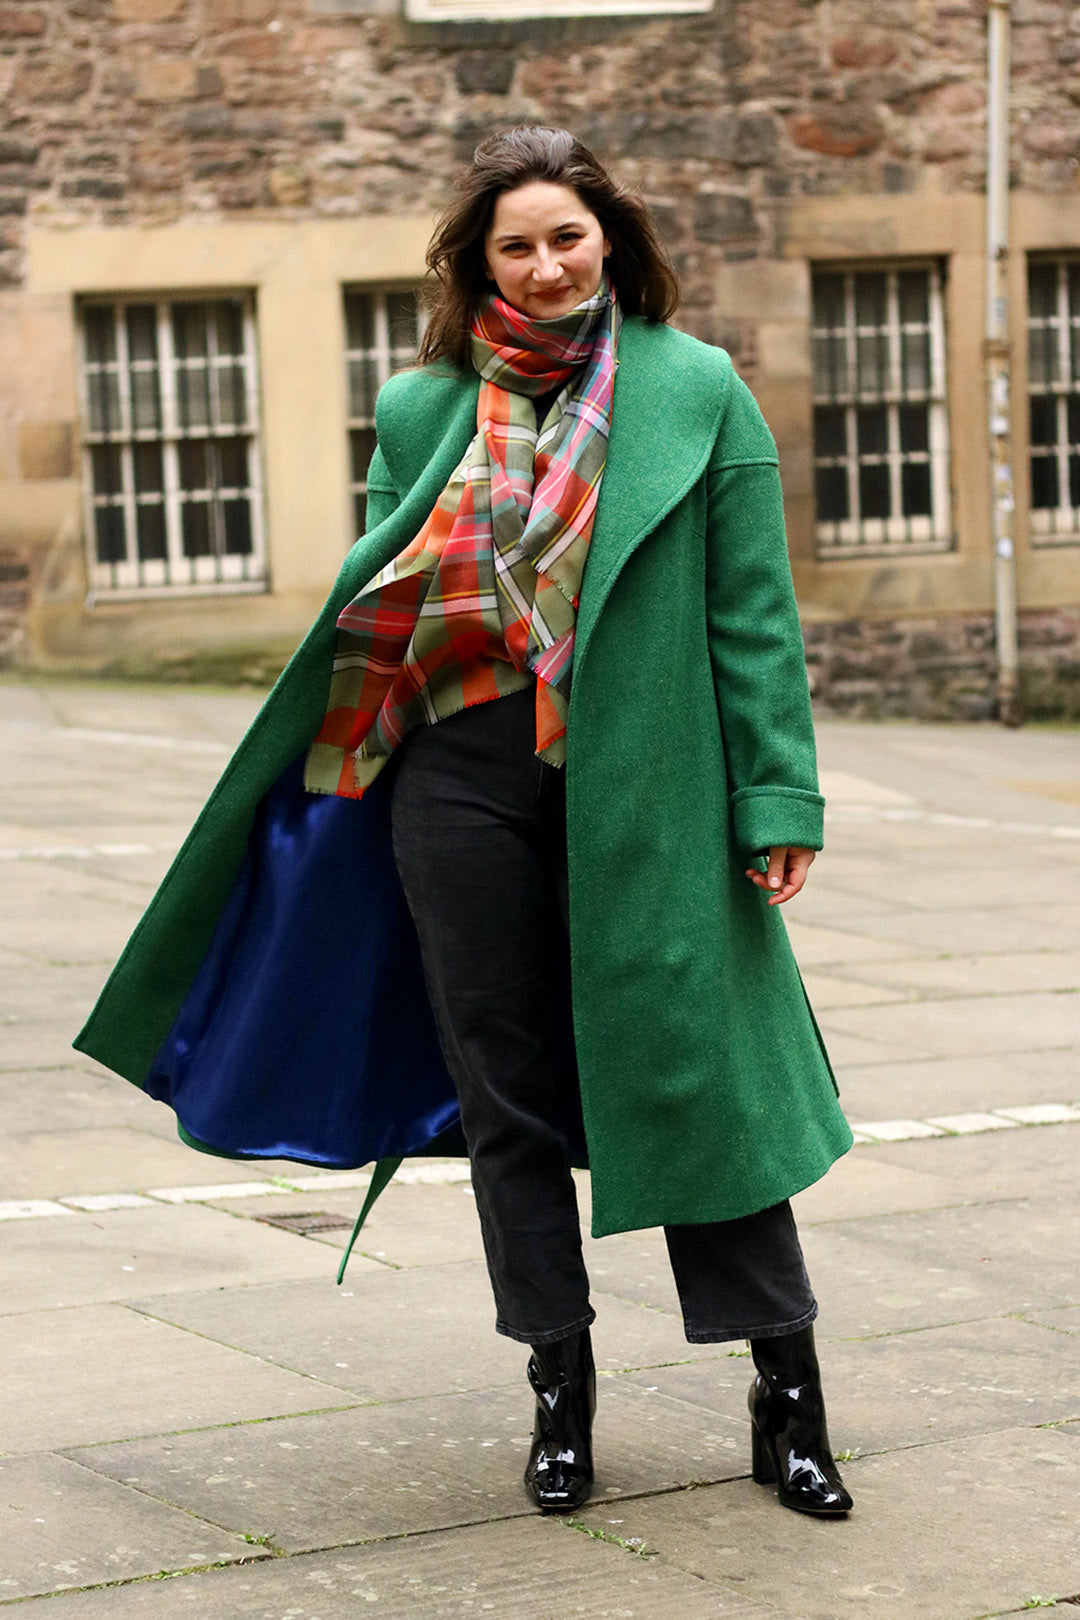 The classic Harris Tweed coat is made in a vibrant emerald green tweed with a royal blue satin lining, shown on model.